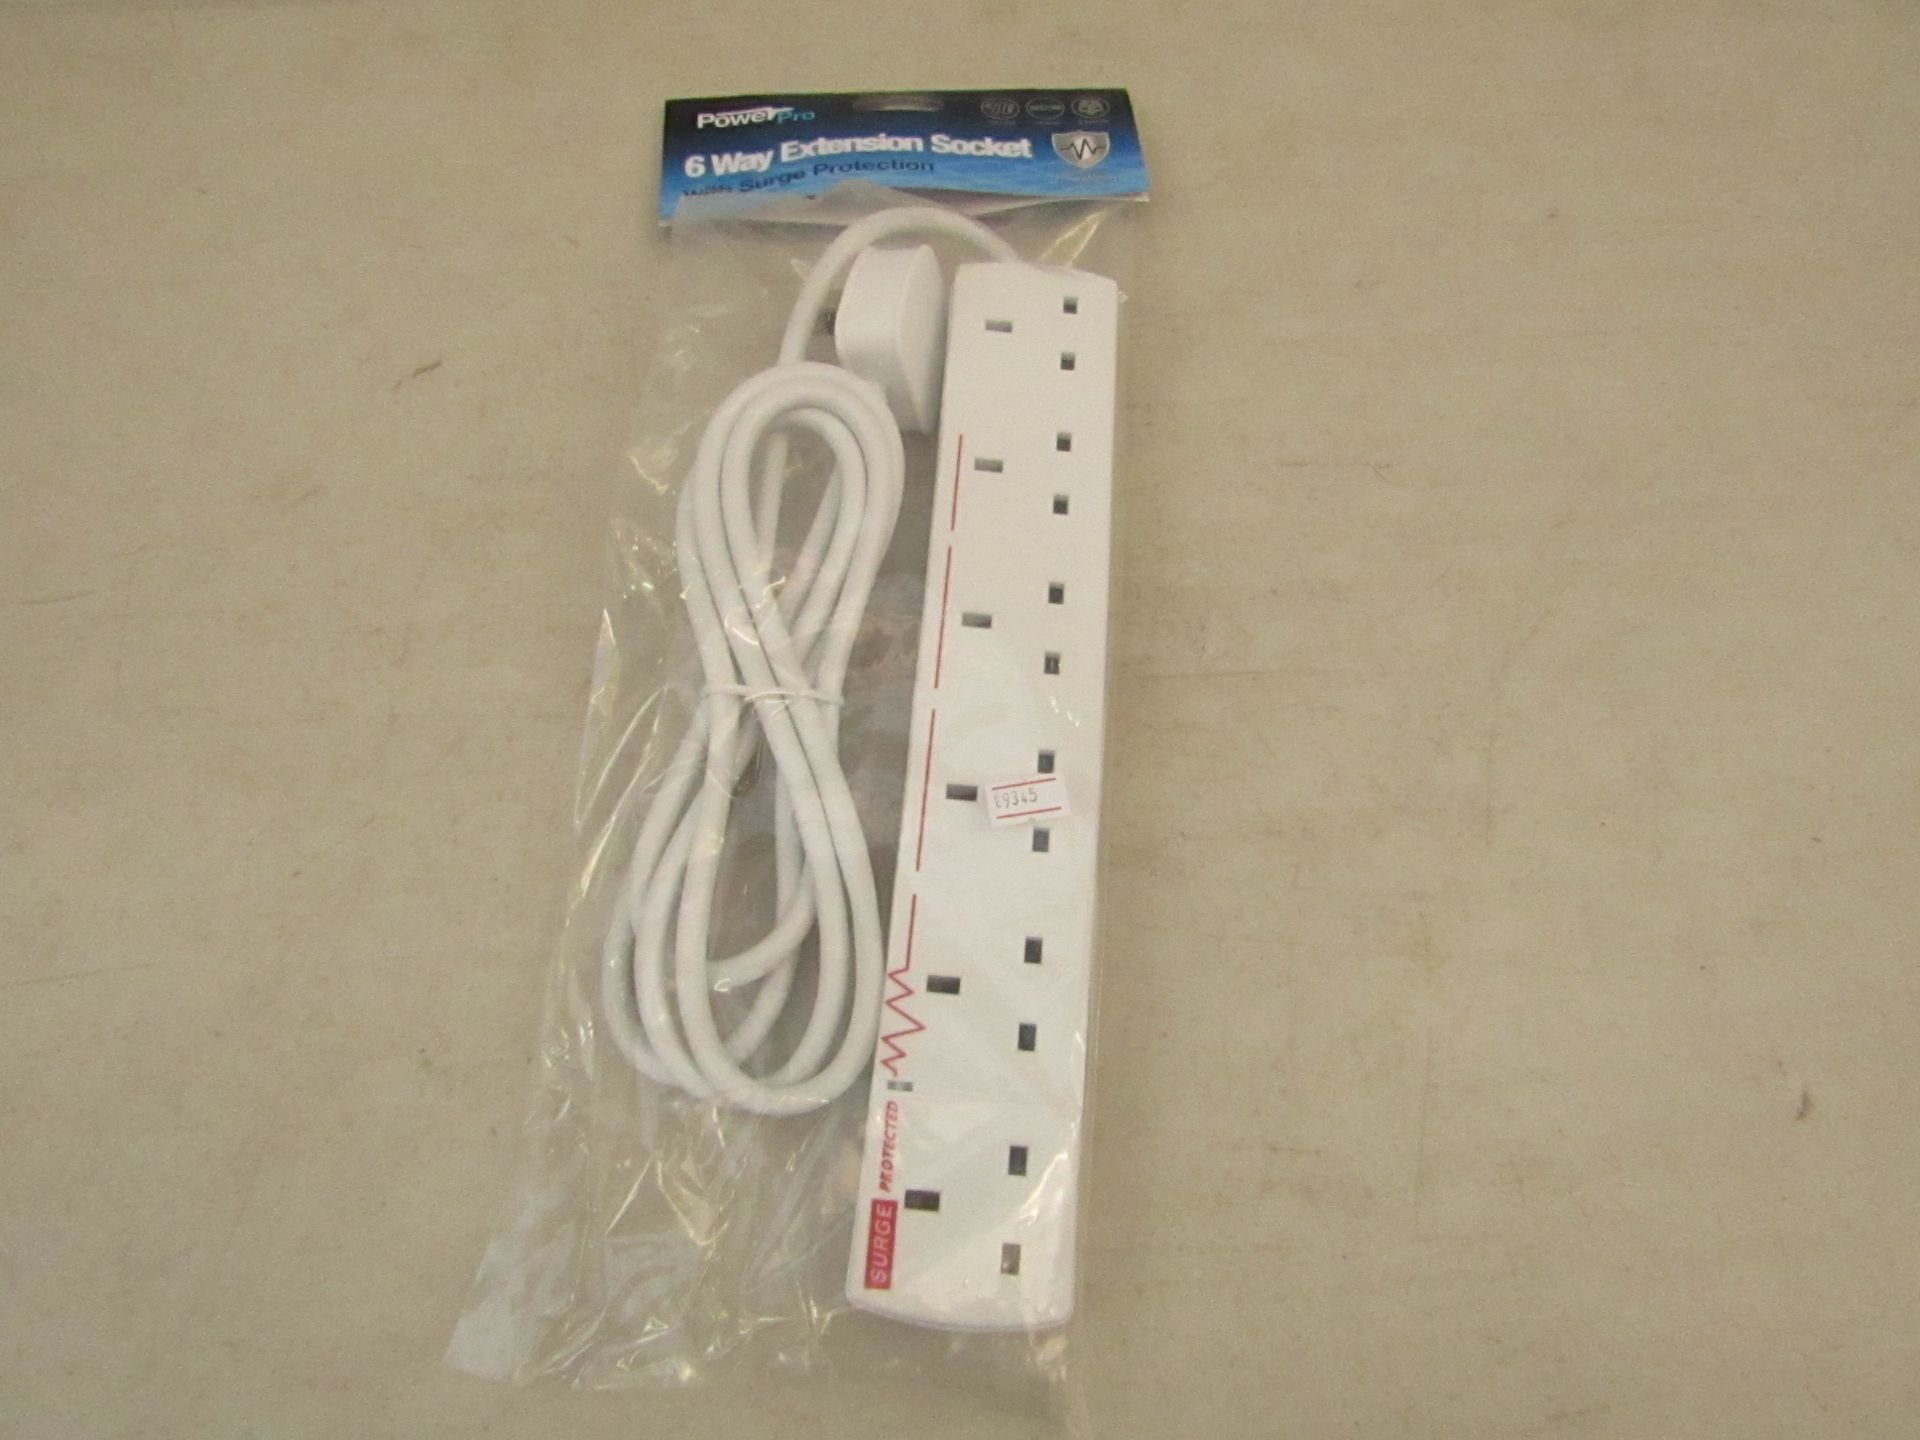 Power Pro 6 way extension socket with surge protection. New in packaging.